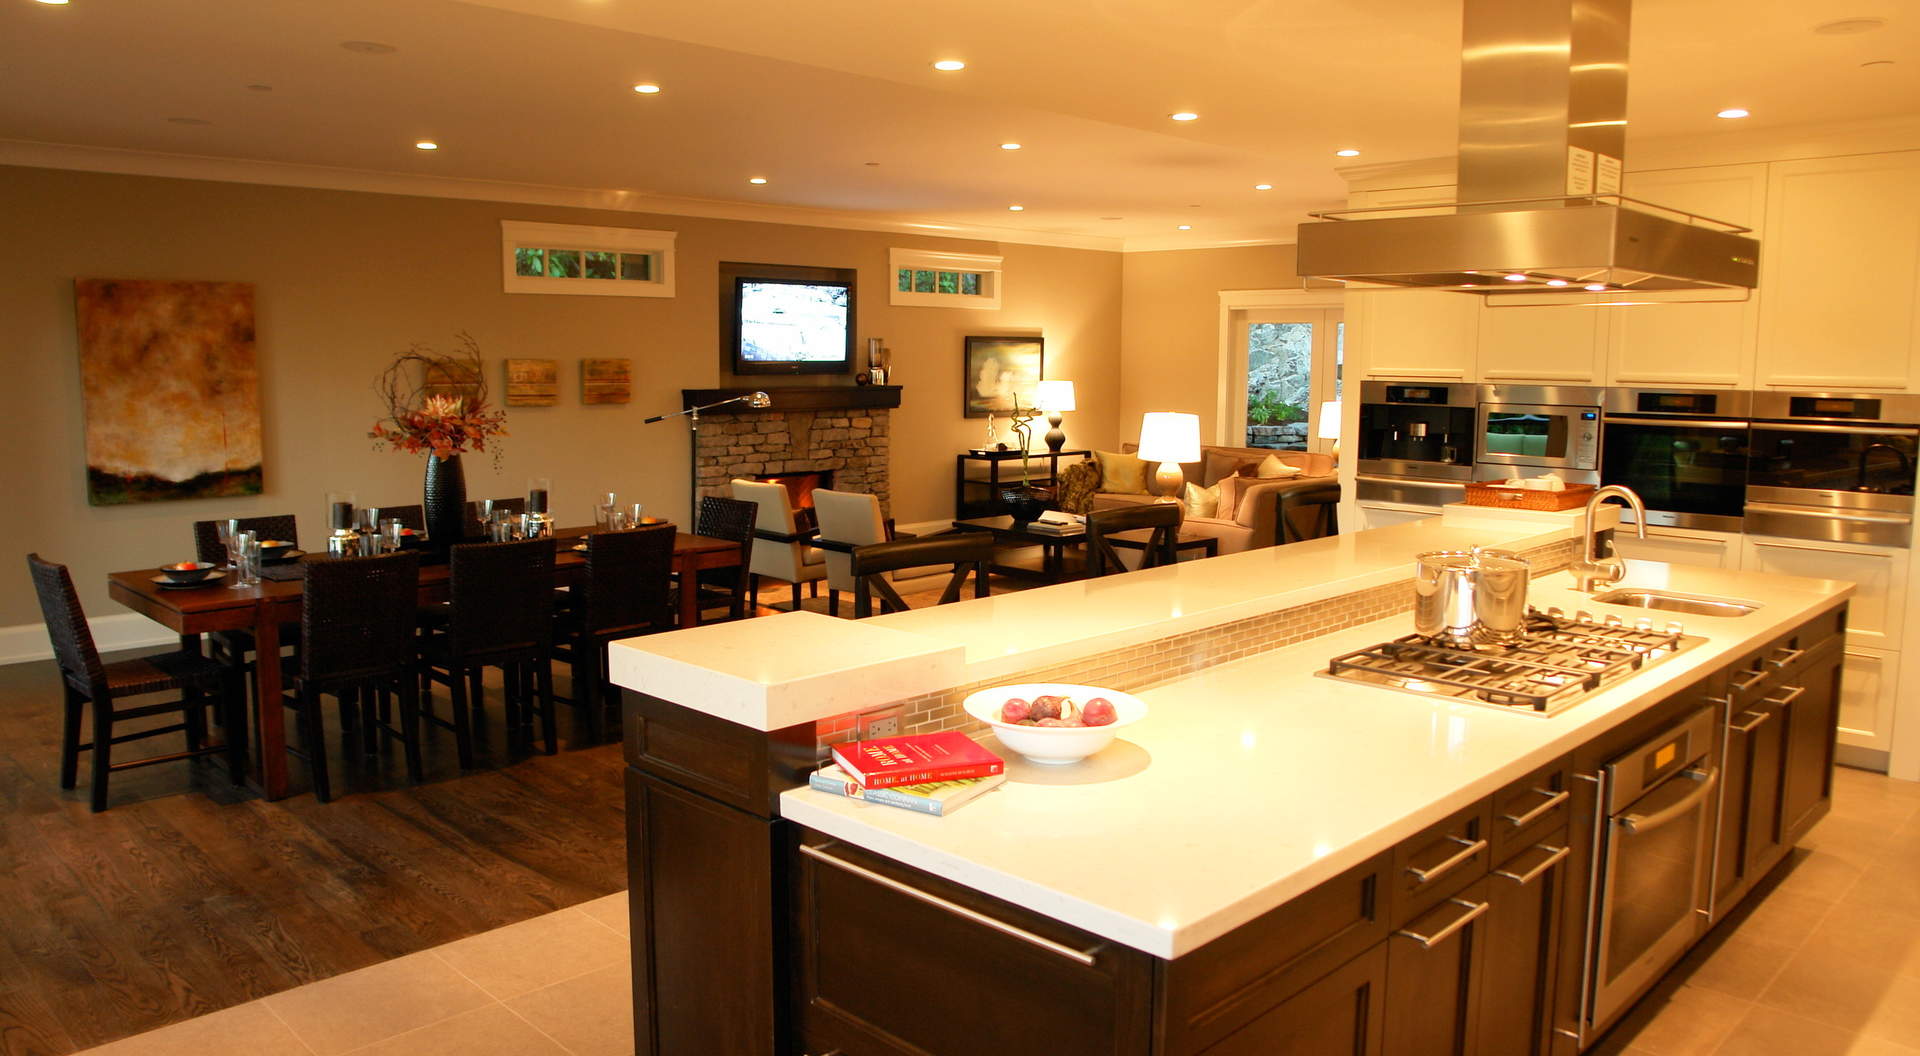 Spectacular Kitchen with Eating Area and Adjacent Family Room